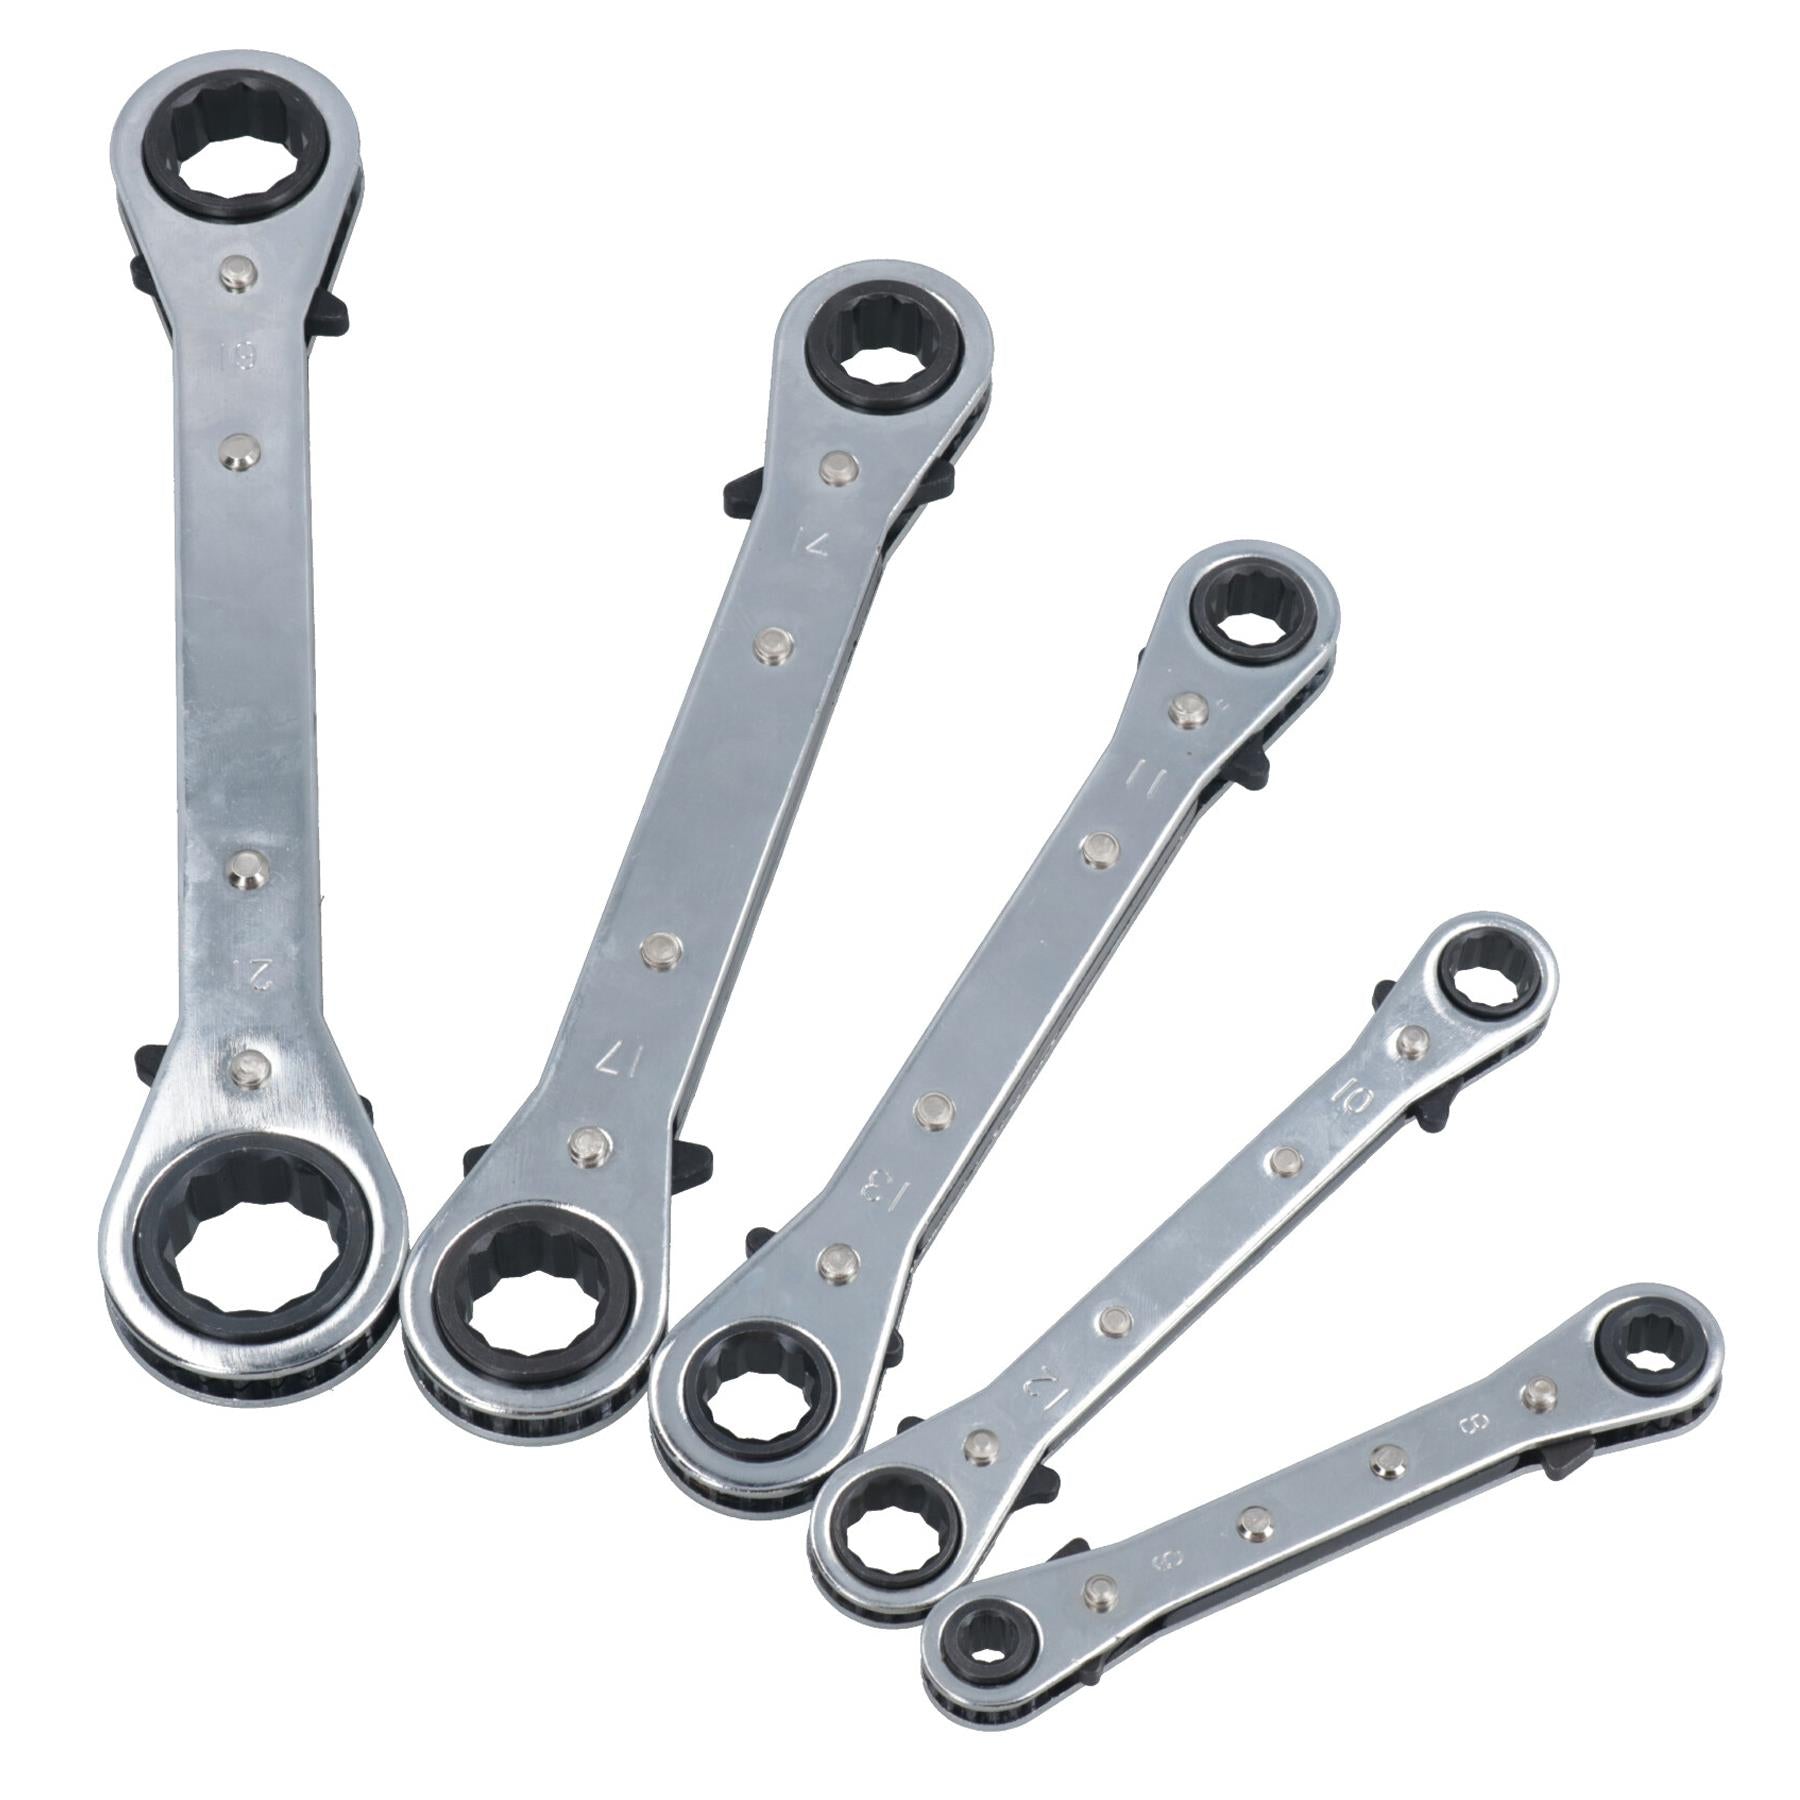 Ratchet Spanner Set Metric Sizes Double Ring Wrench TE075